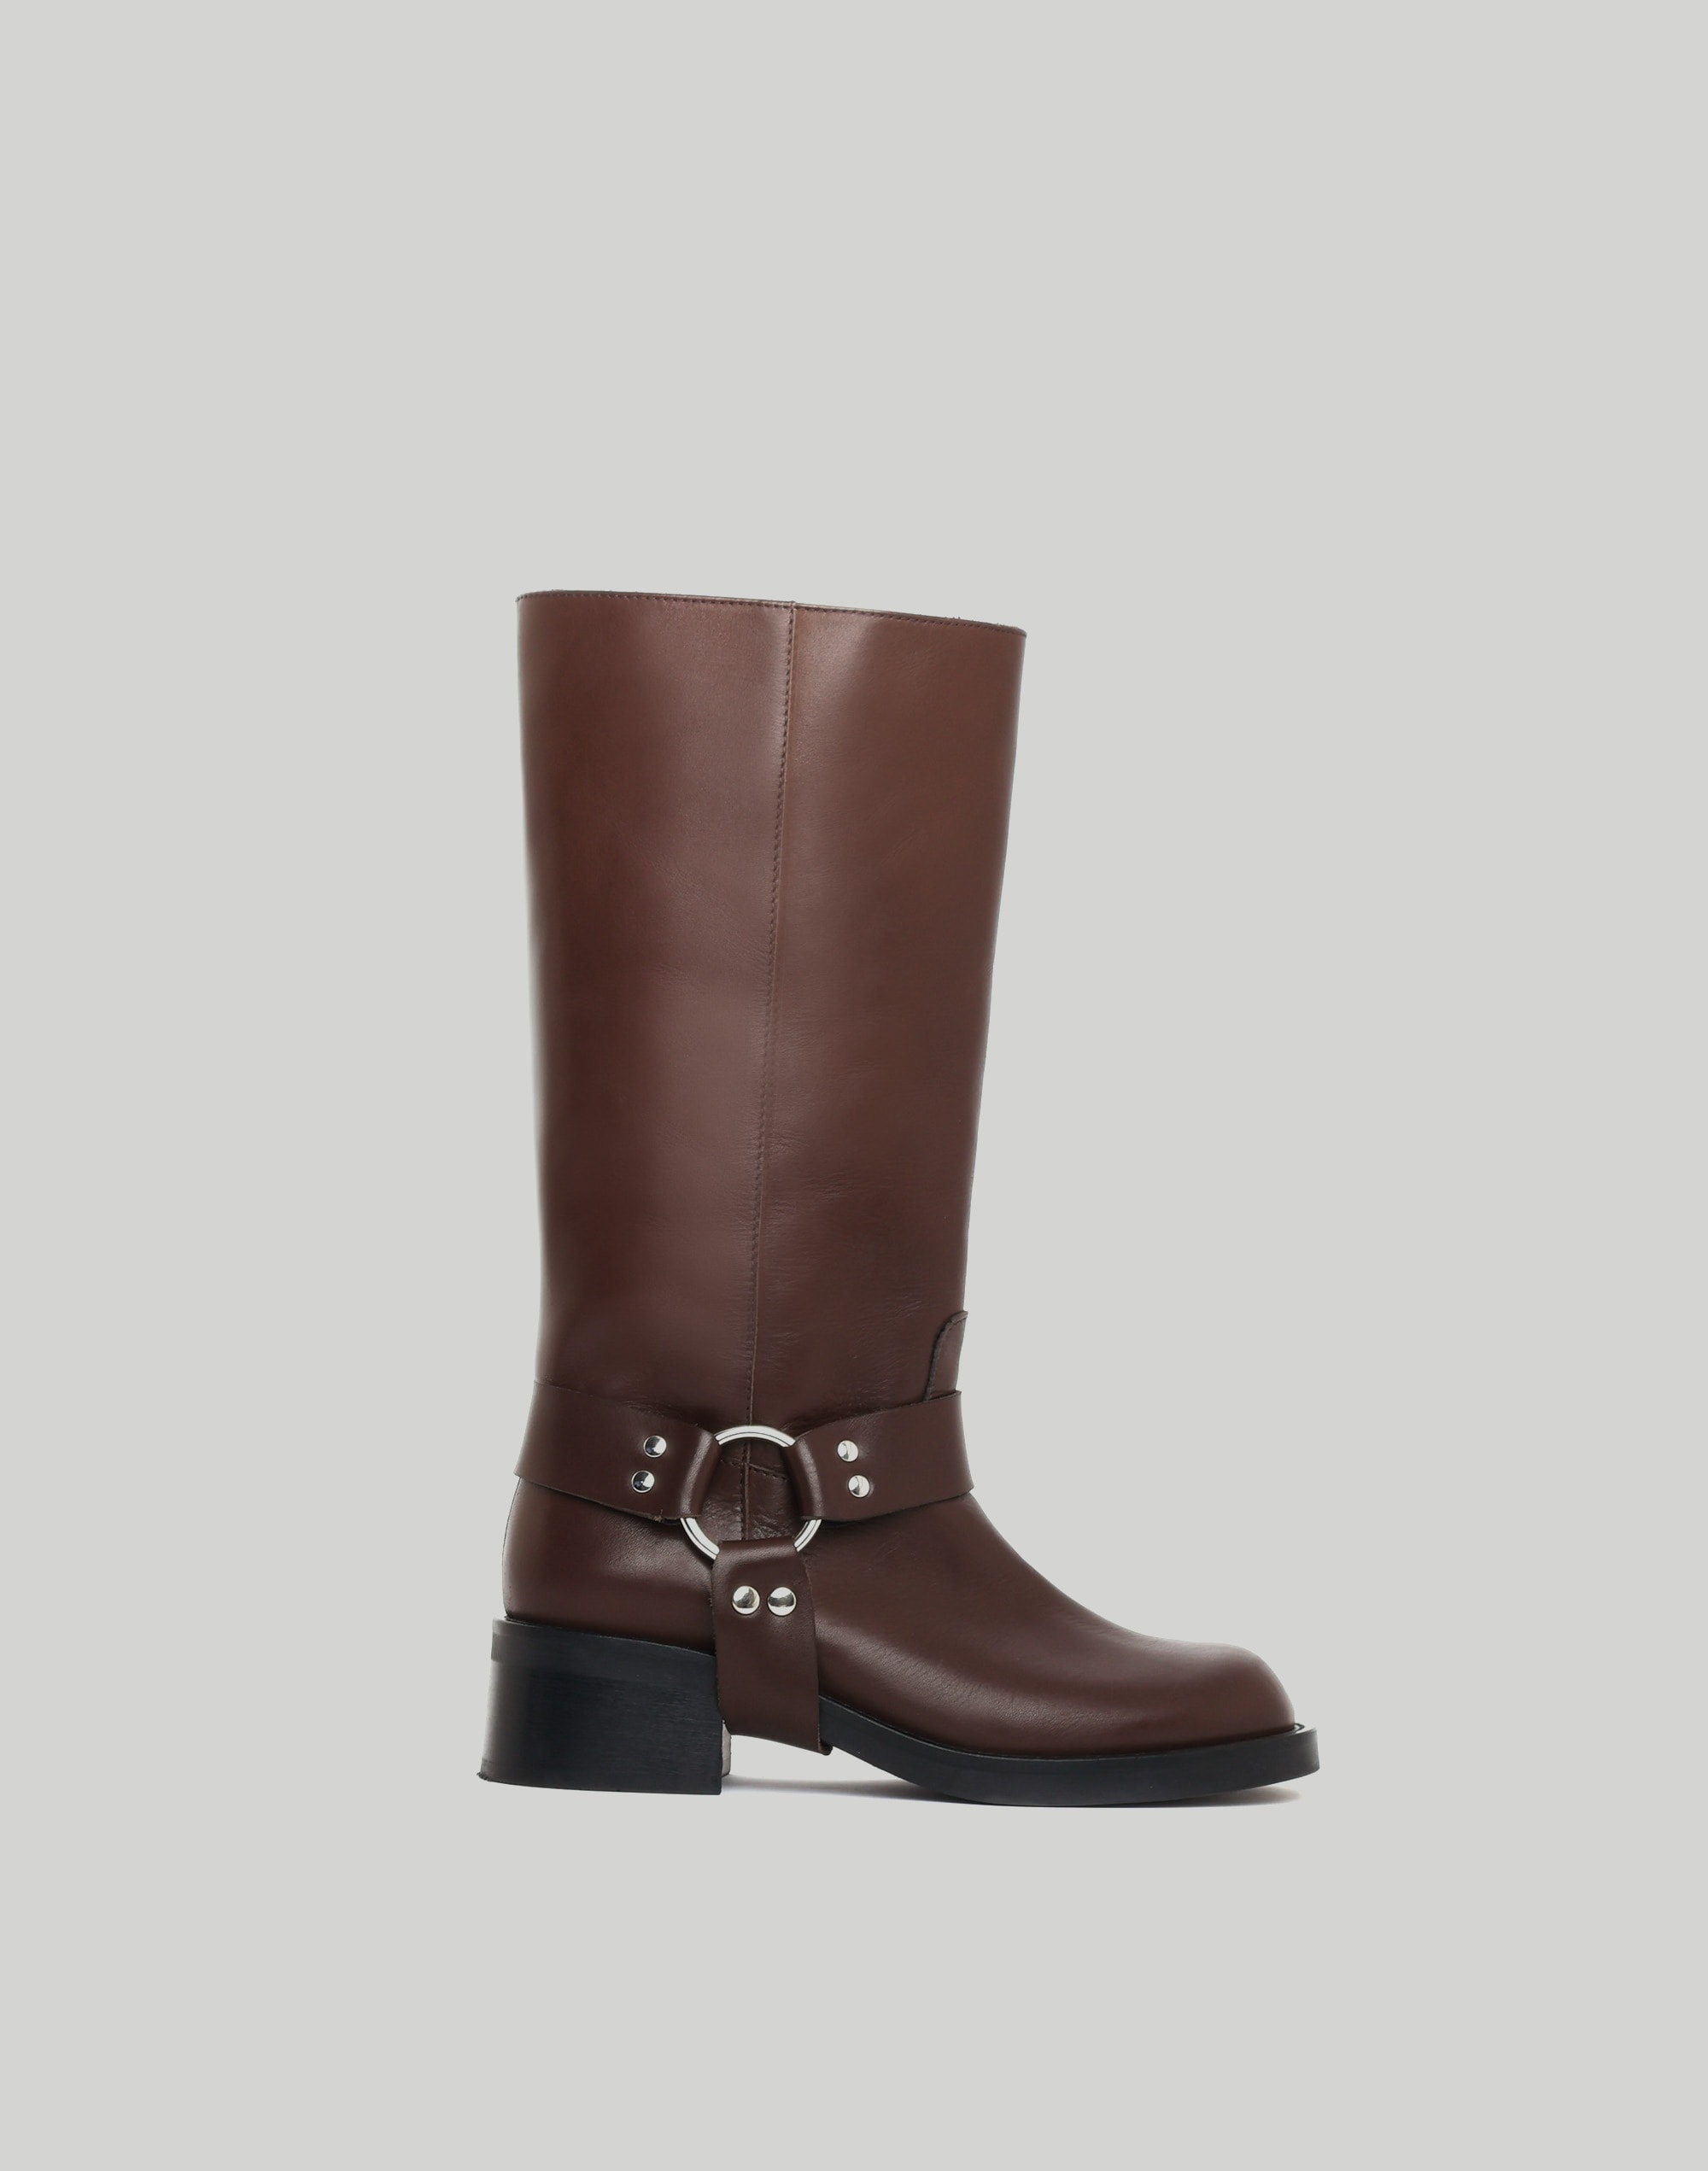 Maguire Lucca Brown Boot